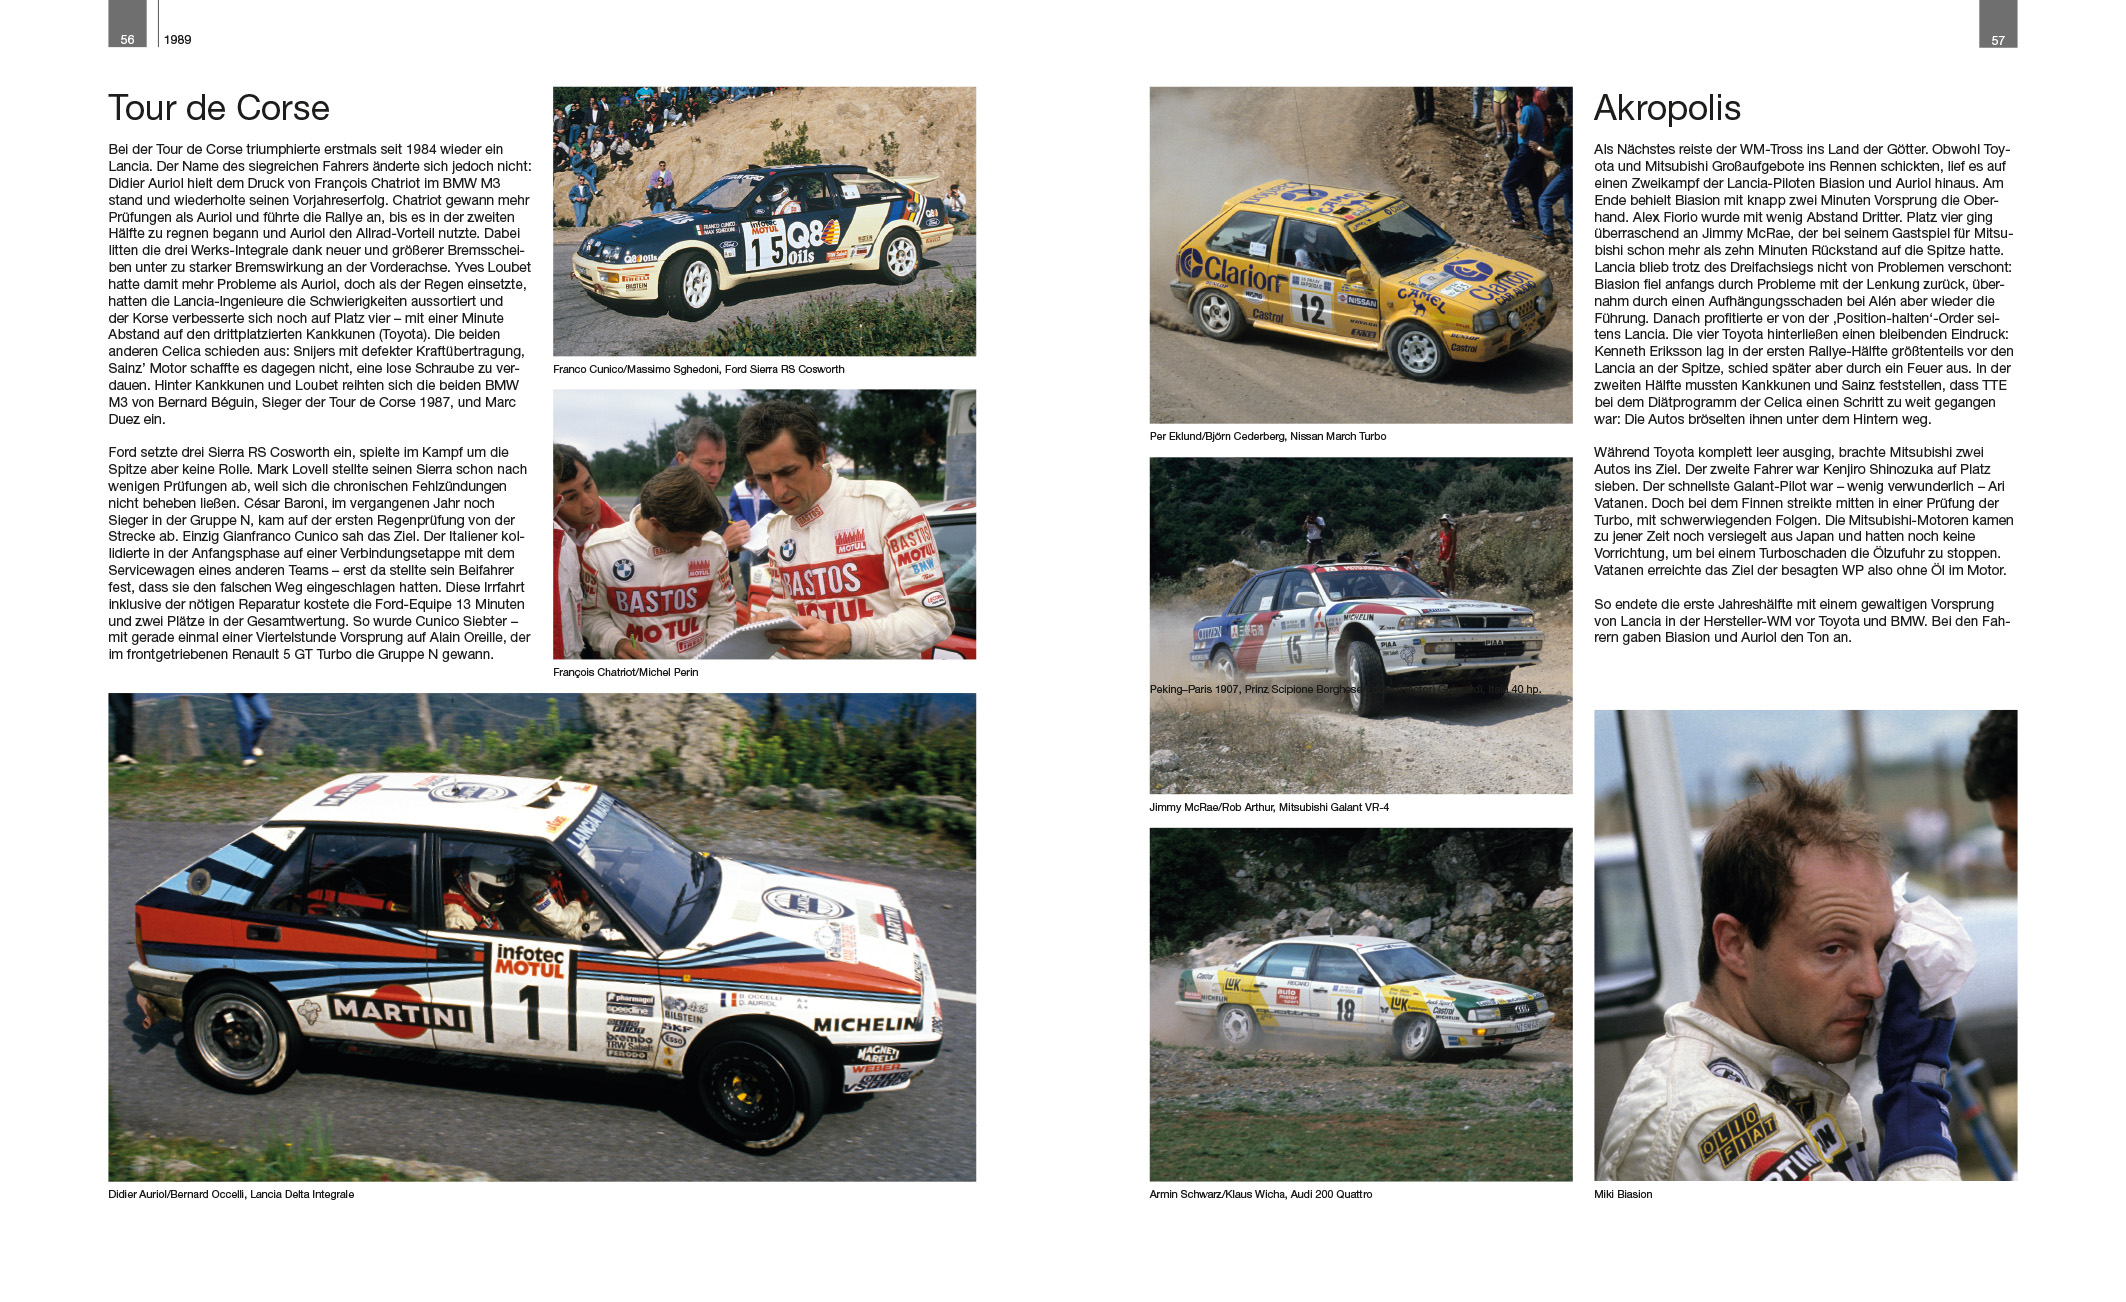 Group A – When Rallying created Road Car Icons